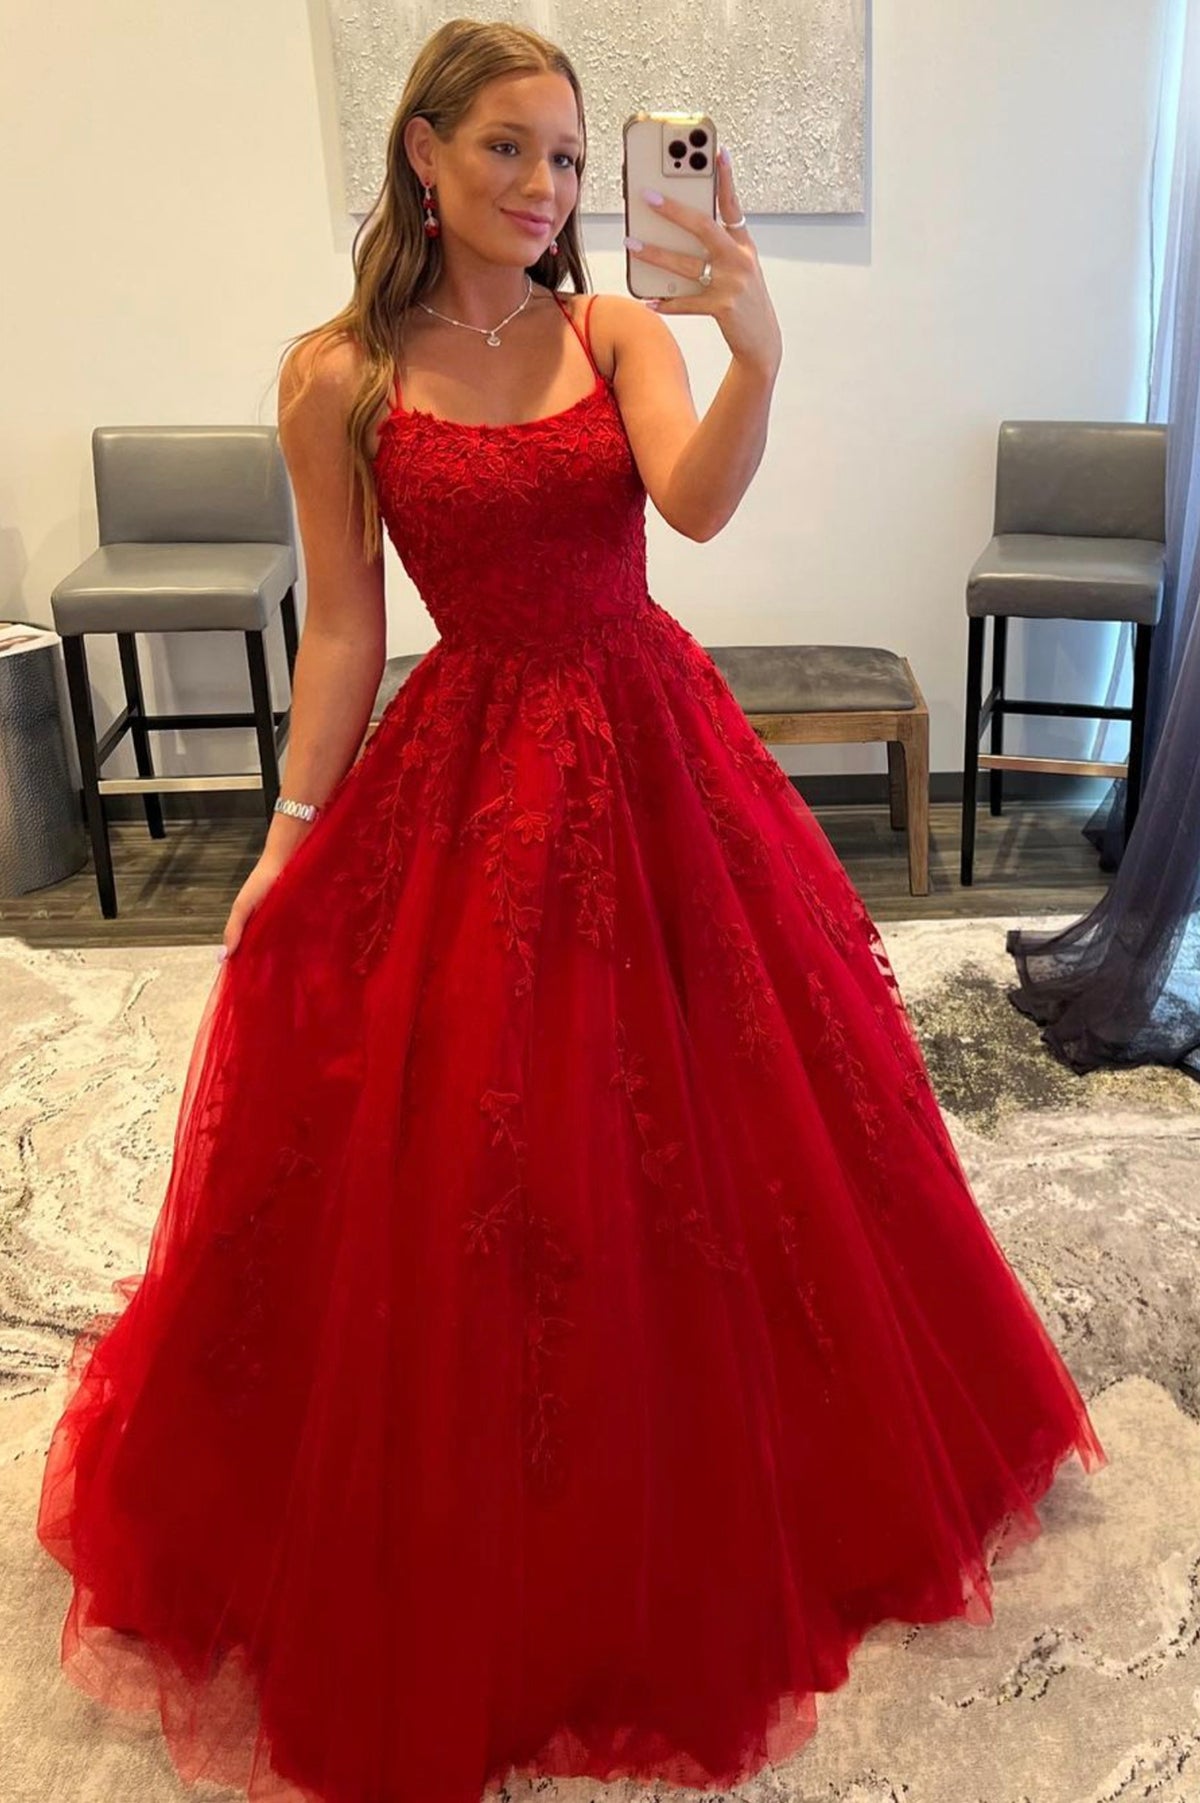 vigocouture Red Tea-Length Prom Dresses Spaghetti Strap Dotted Tulle Homecoming Dress 21758 Custom Colors / 16W